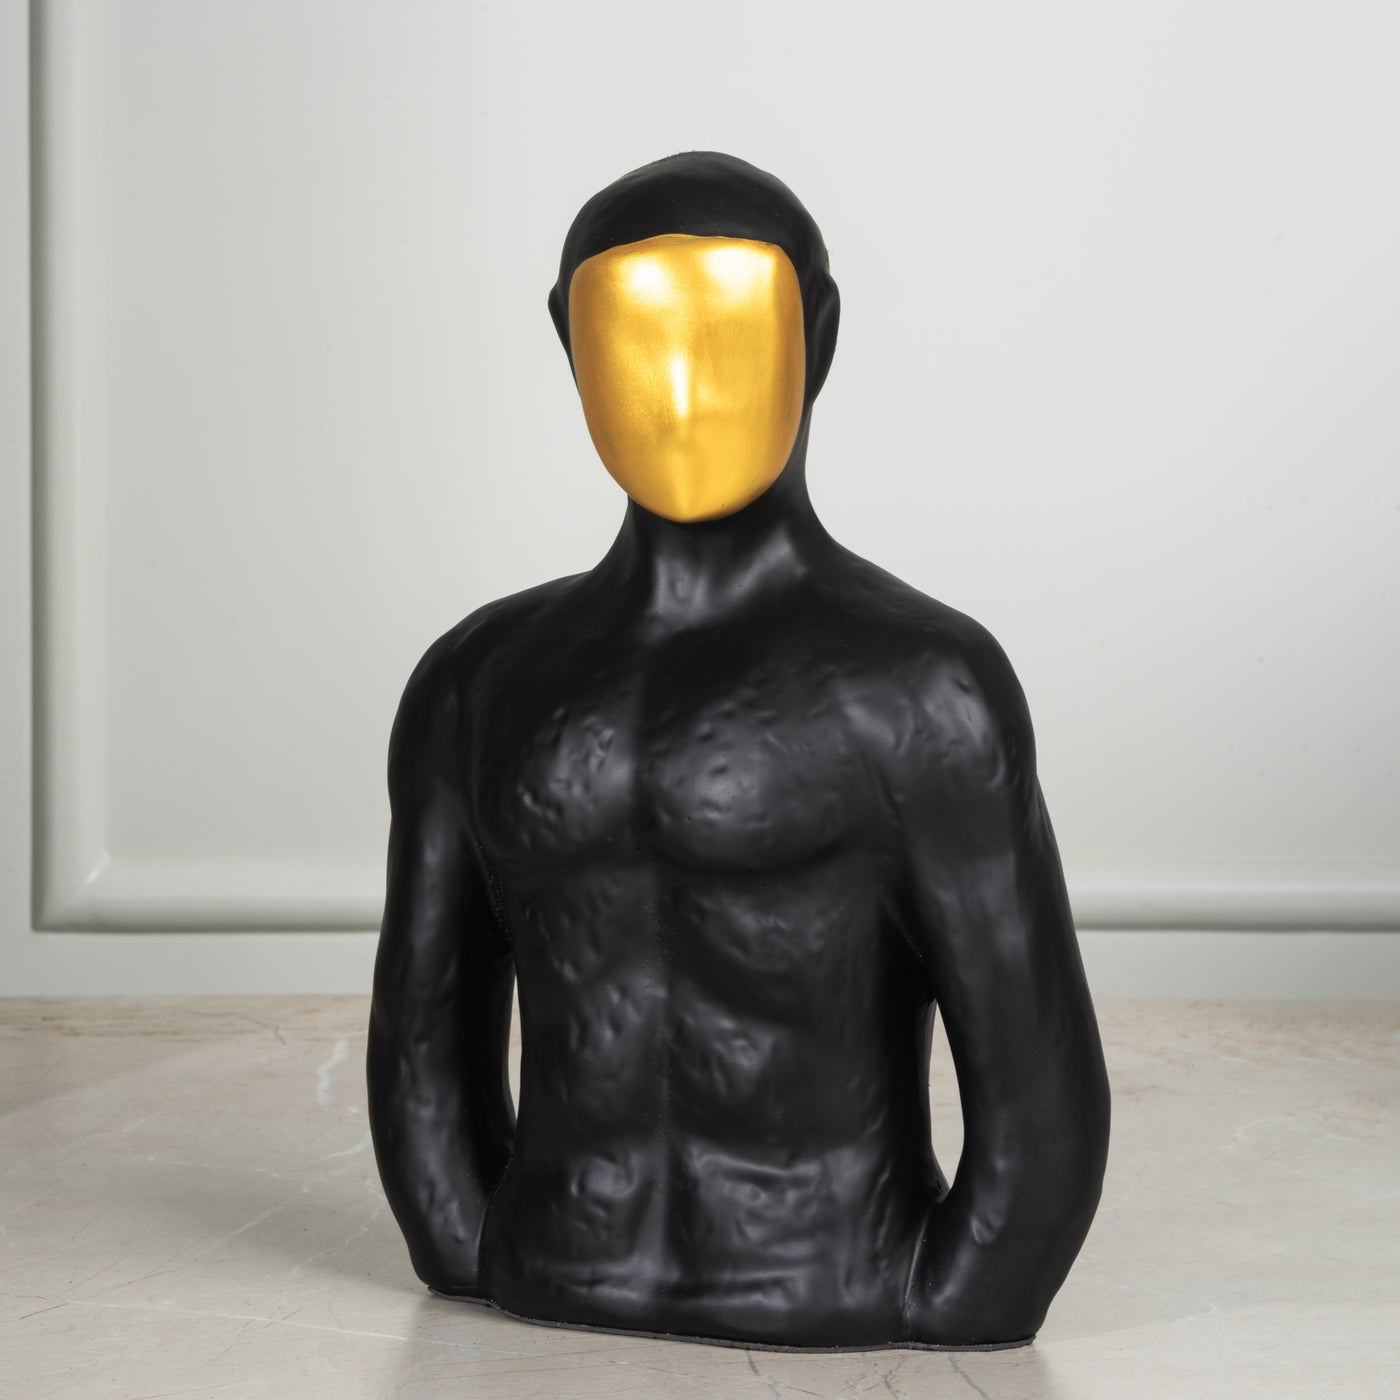 The Muscle man (Black)